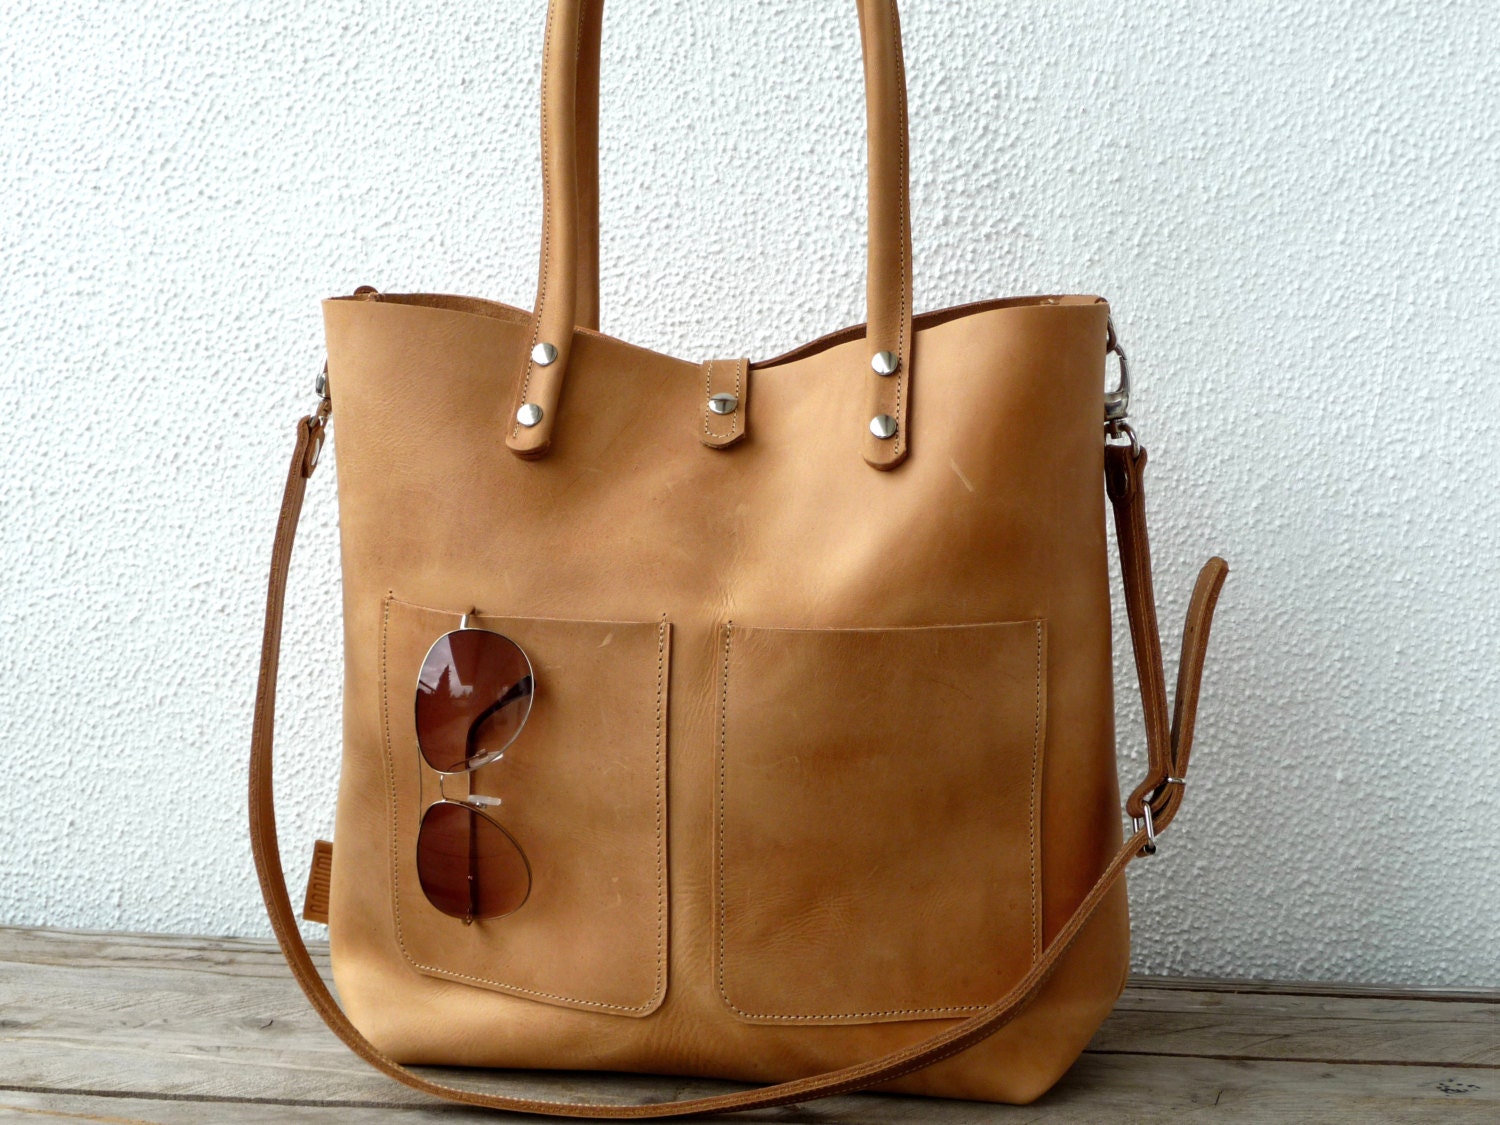 Crossbody bag Leather tote large leather tote distressed